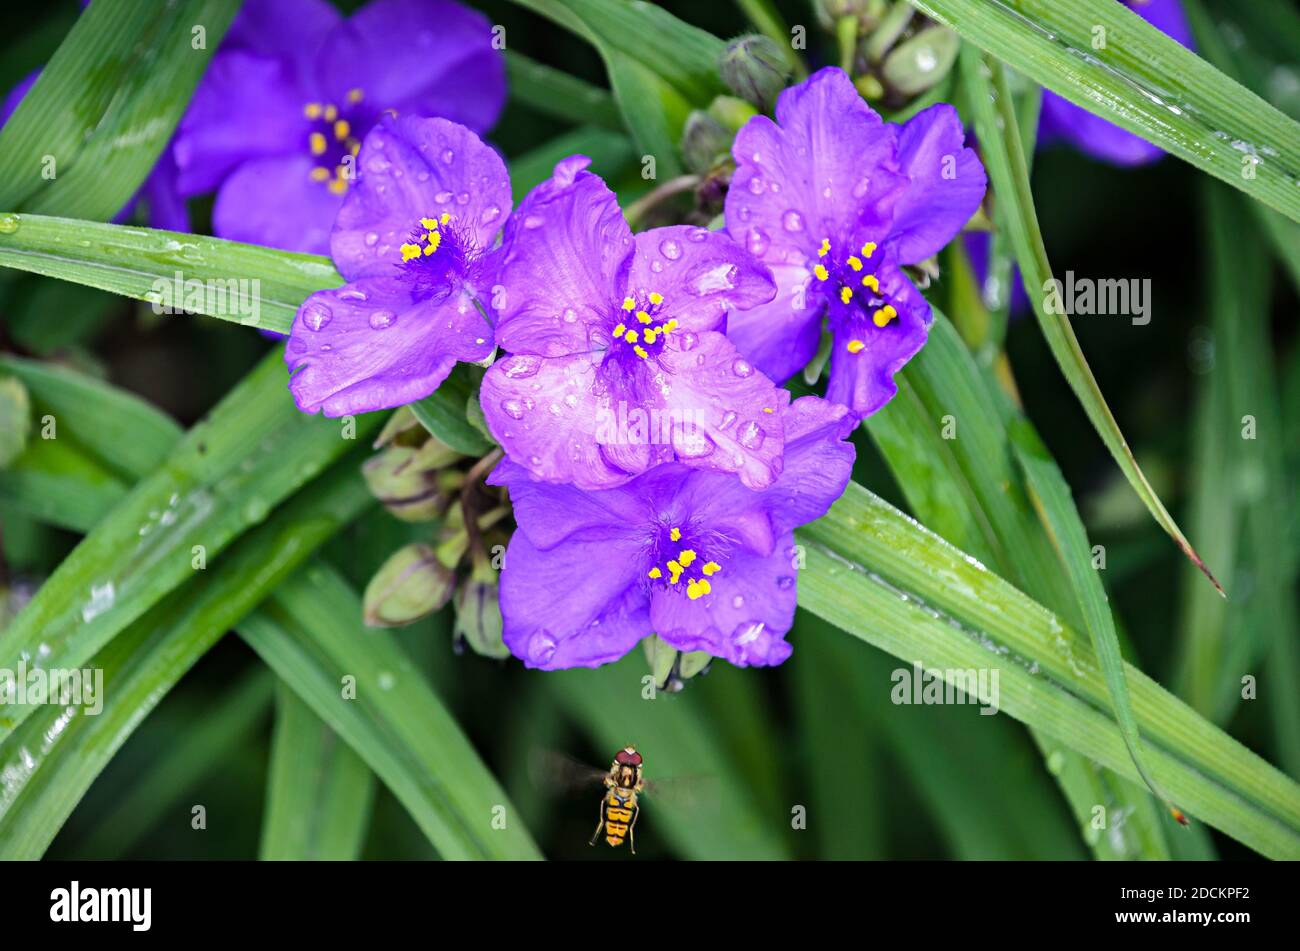 Mauve Spiderwort flower with yellow pistils, close up. Stock Photo